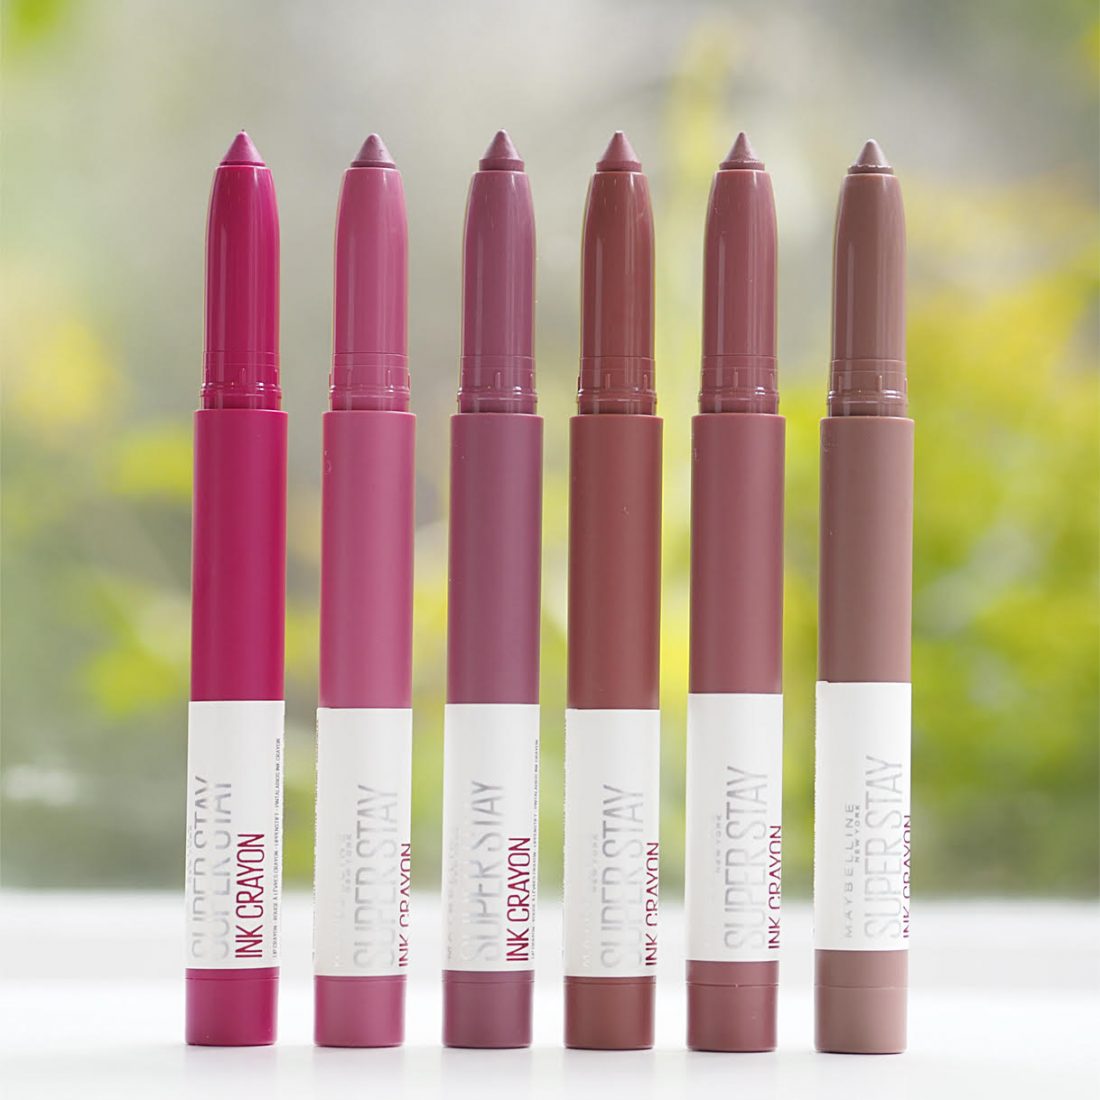 Maybelline SUPERSTAY Ink Crayon. Помада Maybelline New York SUPERSTAY Ink Crayon,. Мейбелин помада карандаш матовая. Помада Lip Crayon Maybelline.